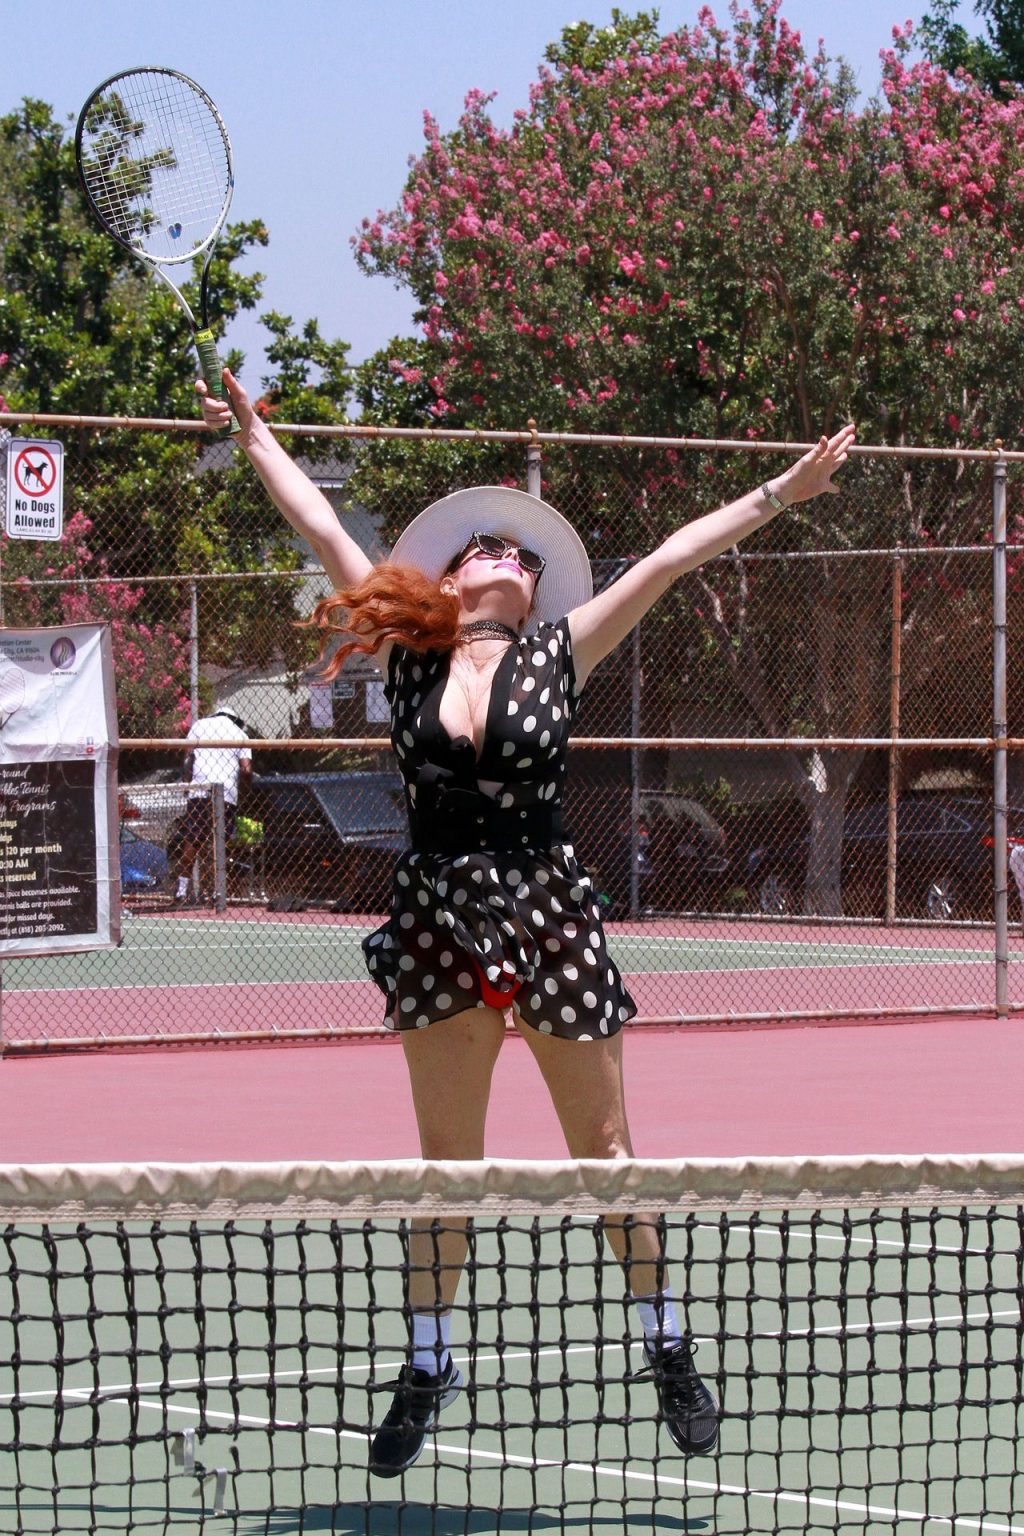 Phoebe Price Shows Off Her Moves on the Tennis Court (84 Photos)